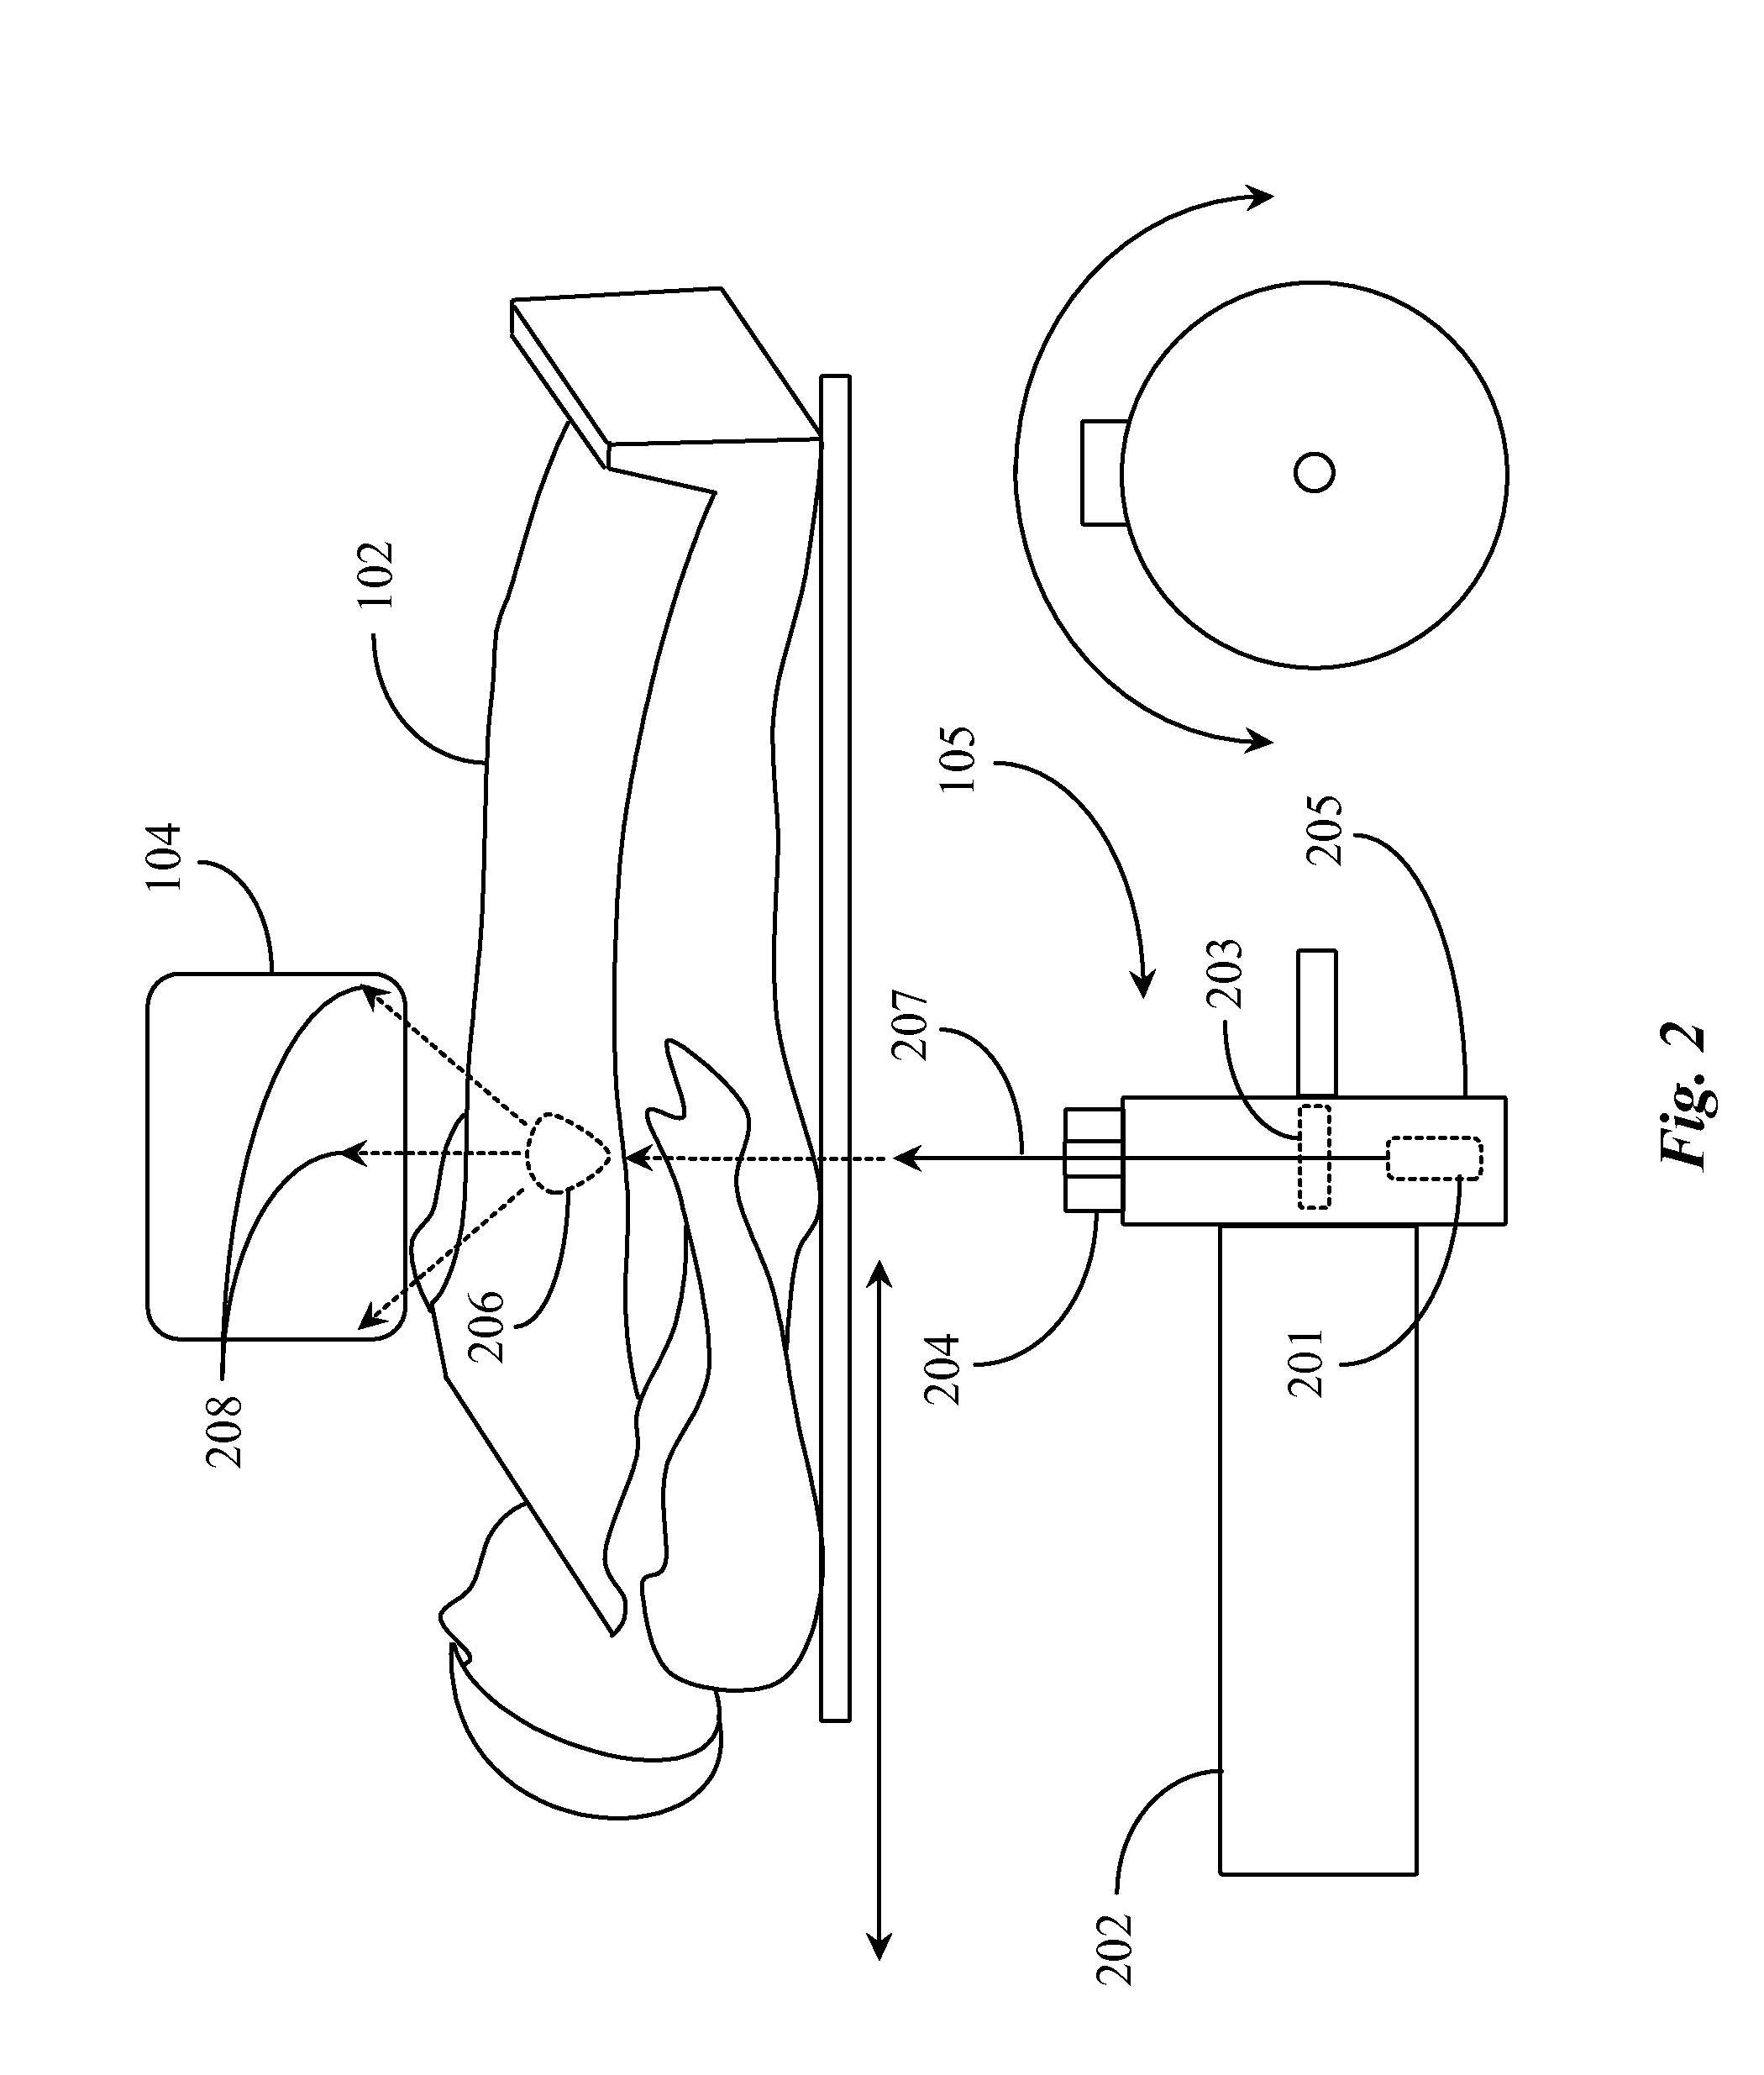 Medical Imaging Machine and Methods of Use